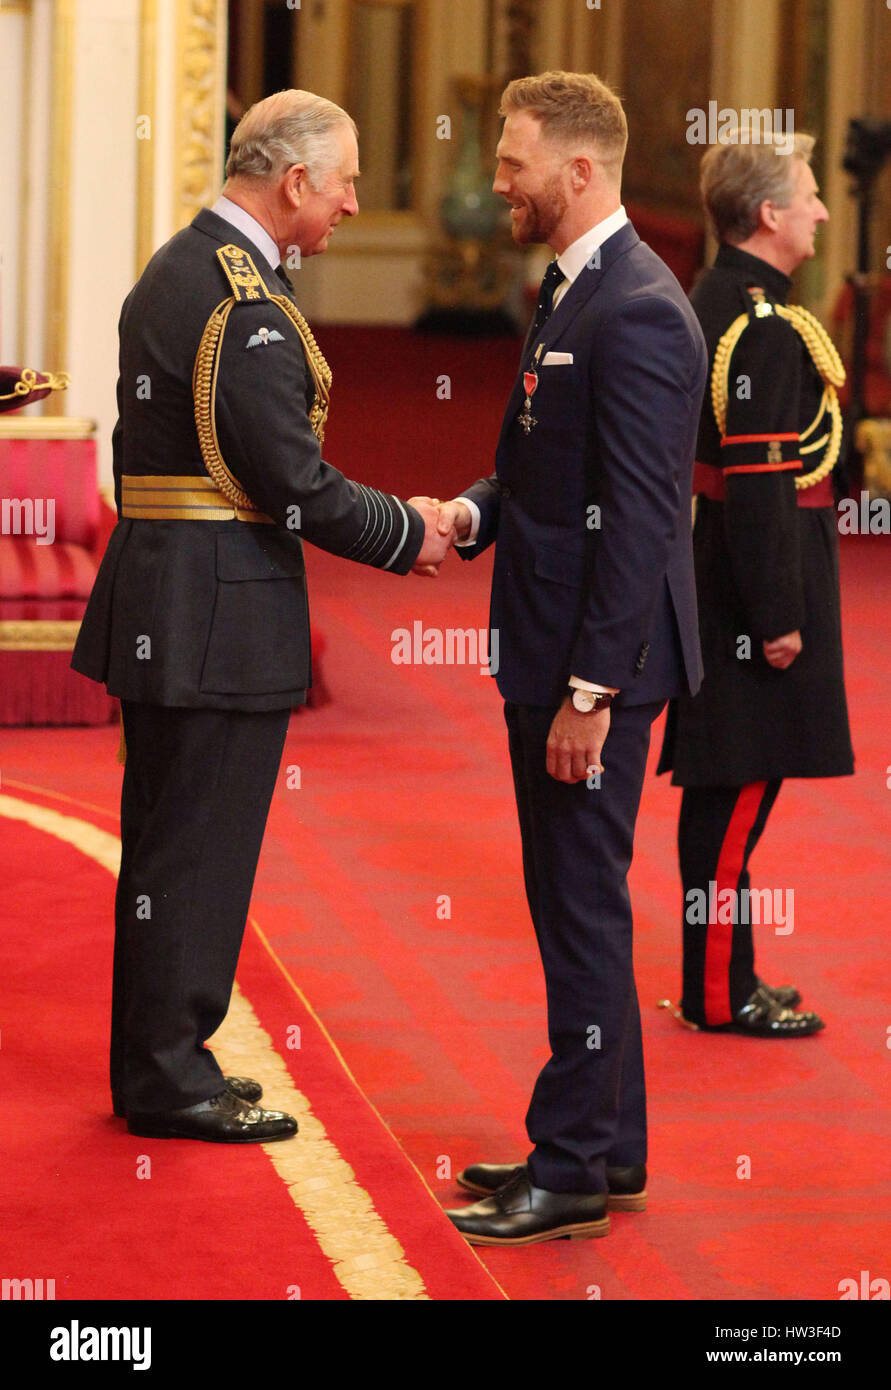 Rower William Satch is made an MBE by the Prince of Wales during an  Investiture ceremony at Buckingham Palace, London Stock Photo - Alamy